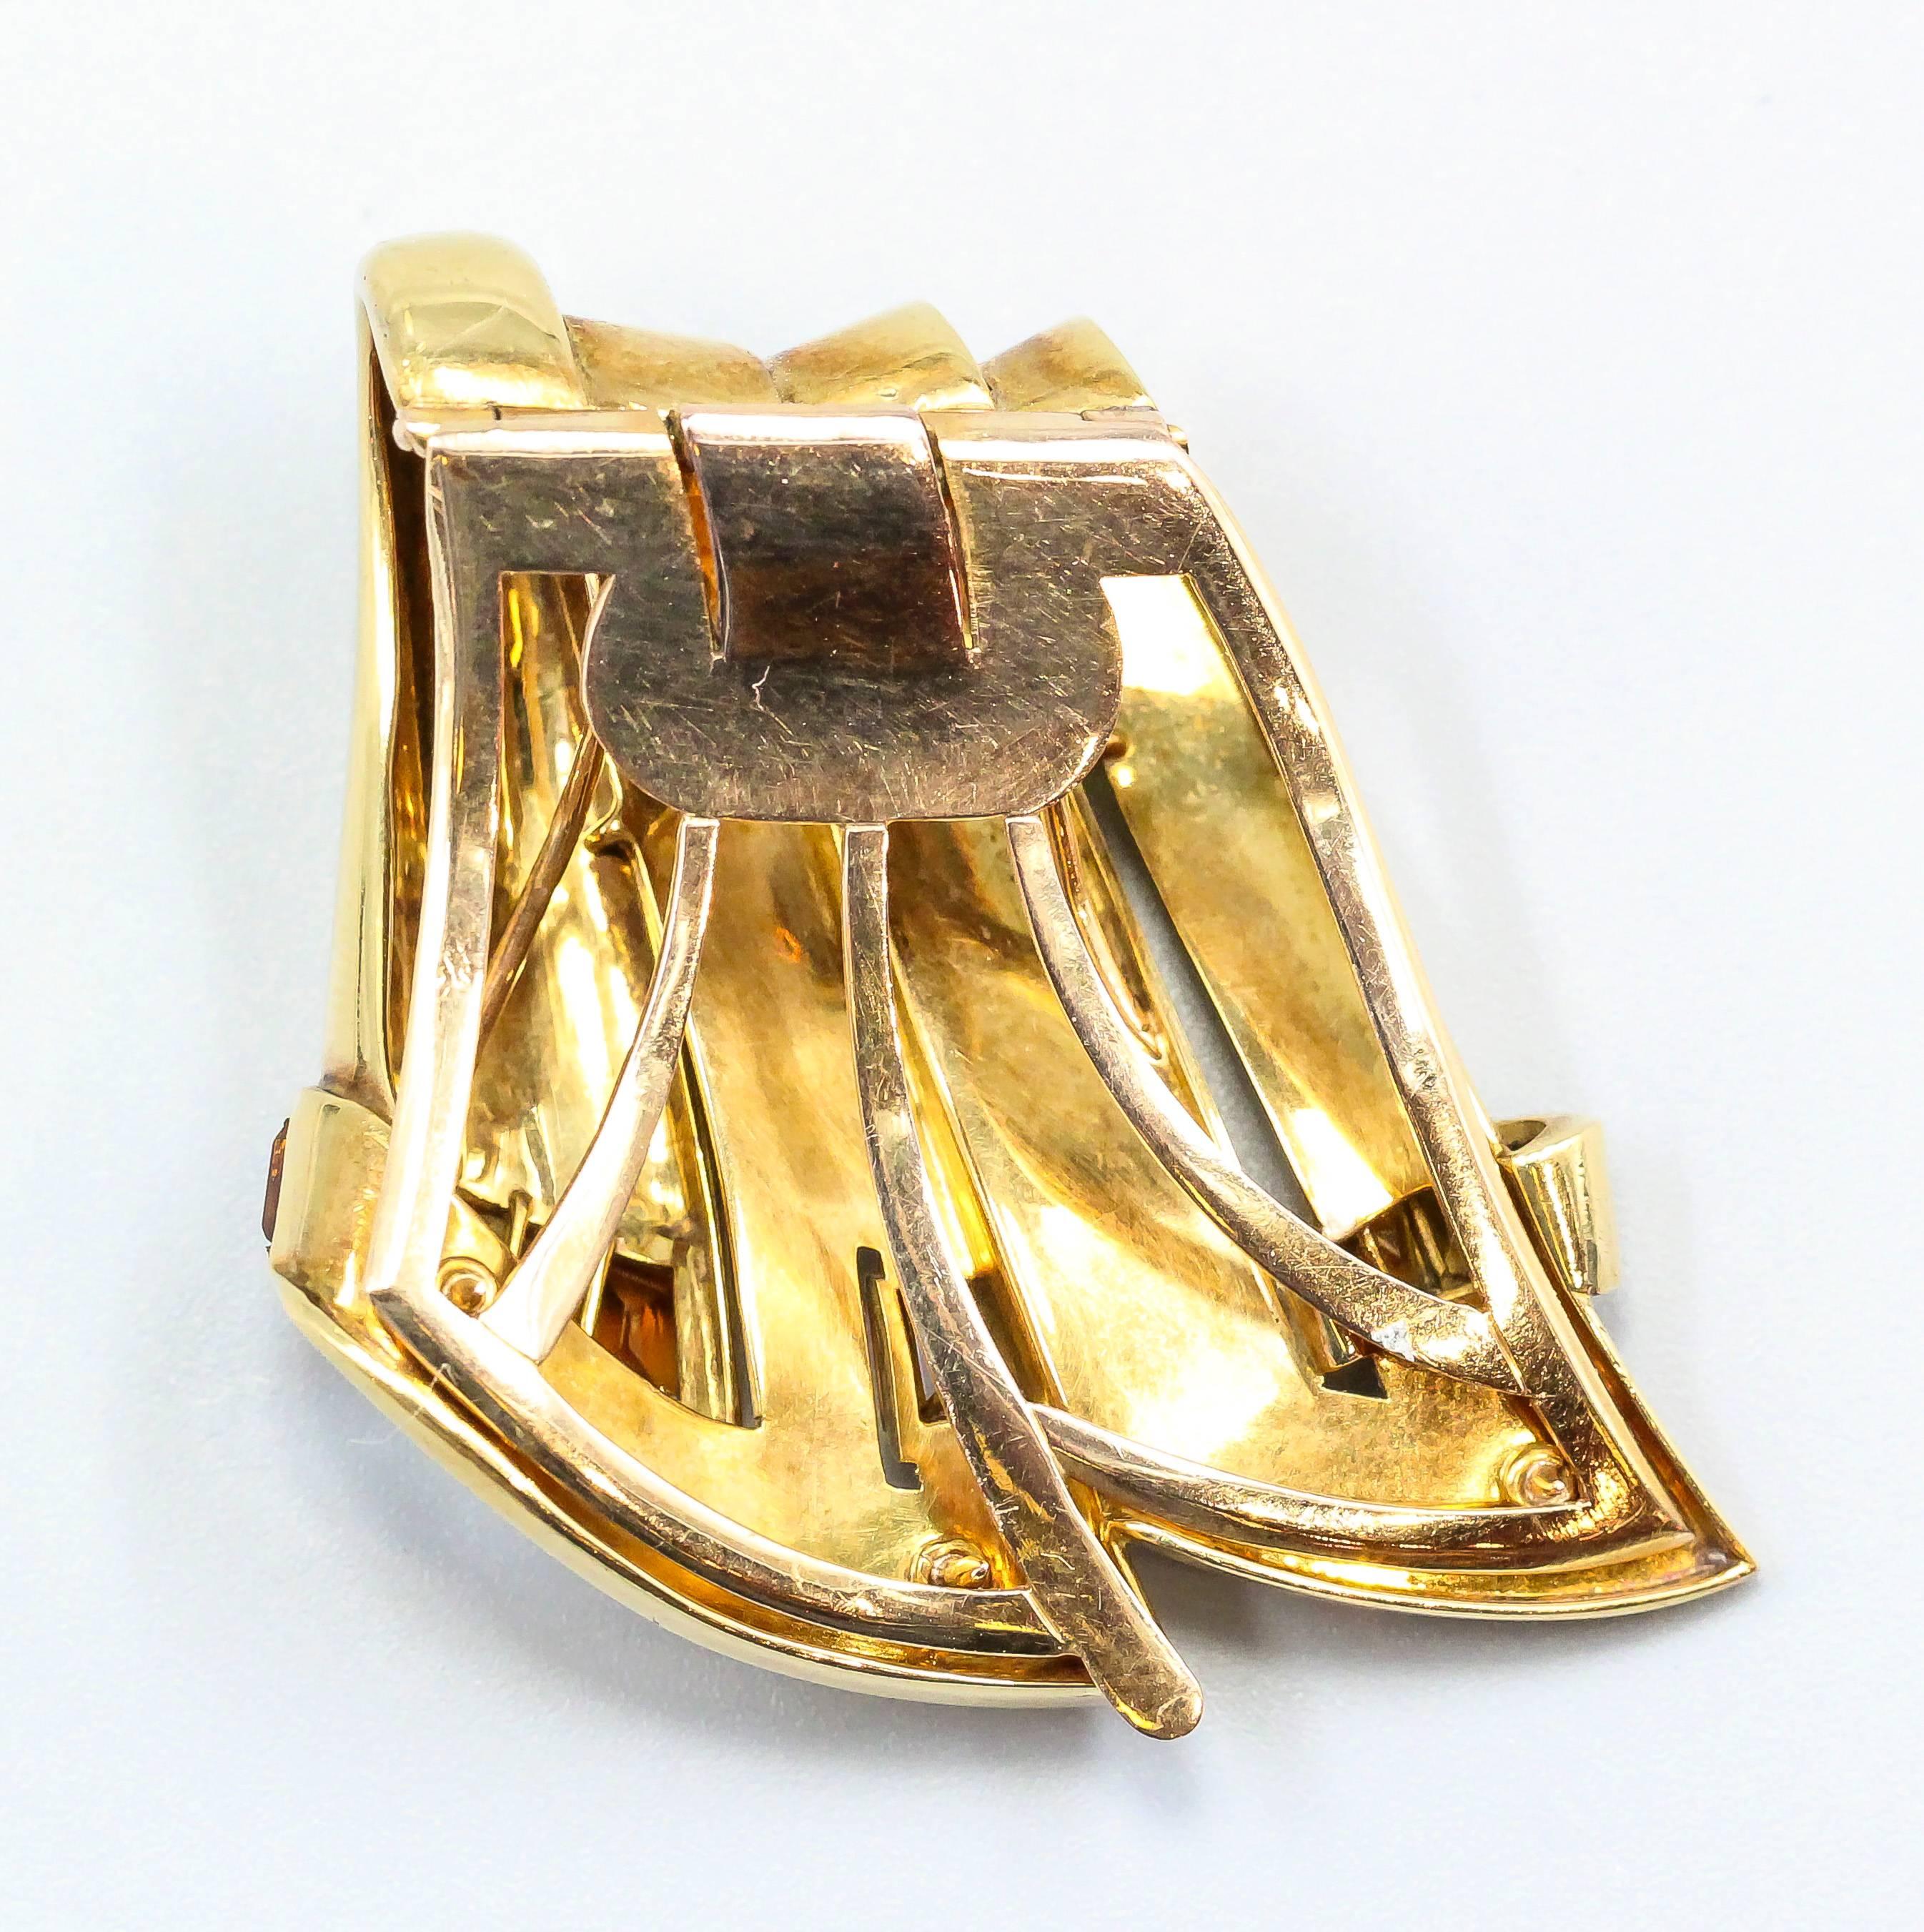 Chic retro citrine and 18K yellow gold brooch of French origin, circa 1940s. It features bright citrines and an elegant flowing design. Great workmanship throughout. 

Hallmarks: French 18K gold assay mark, maker's mark, reference numbers.